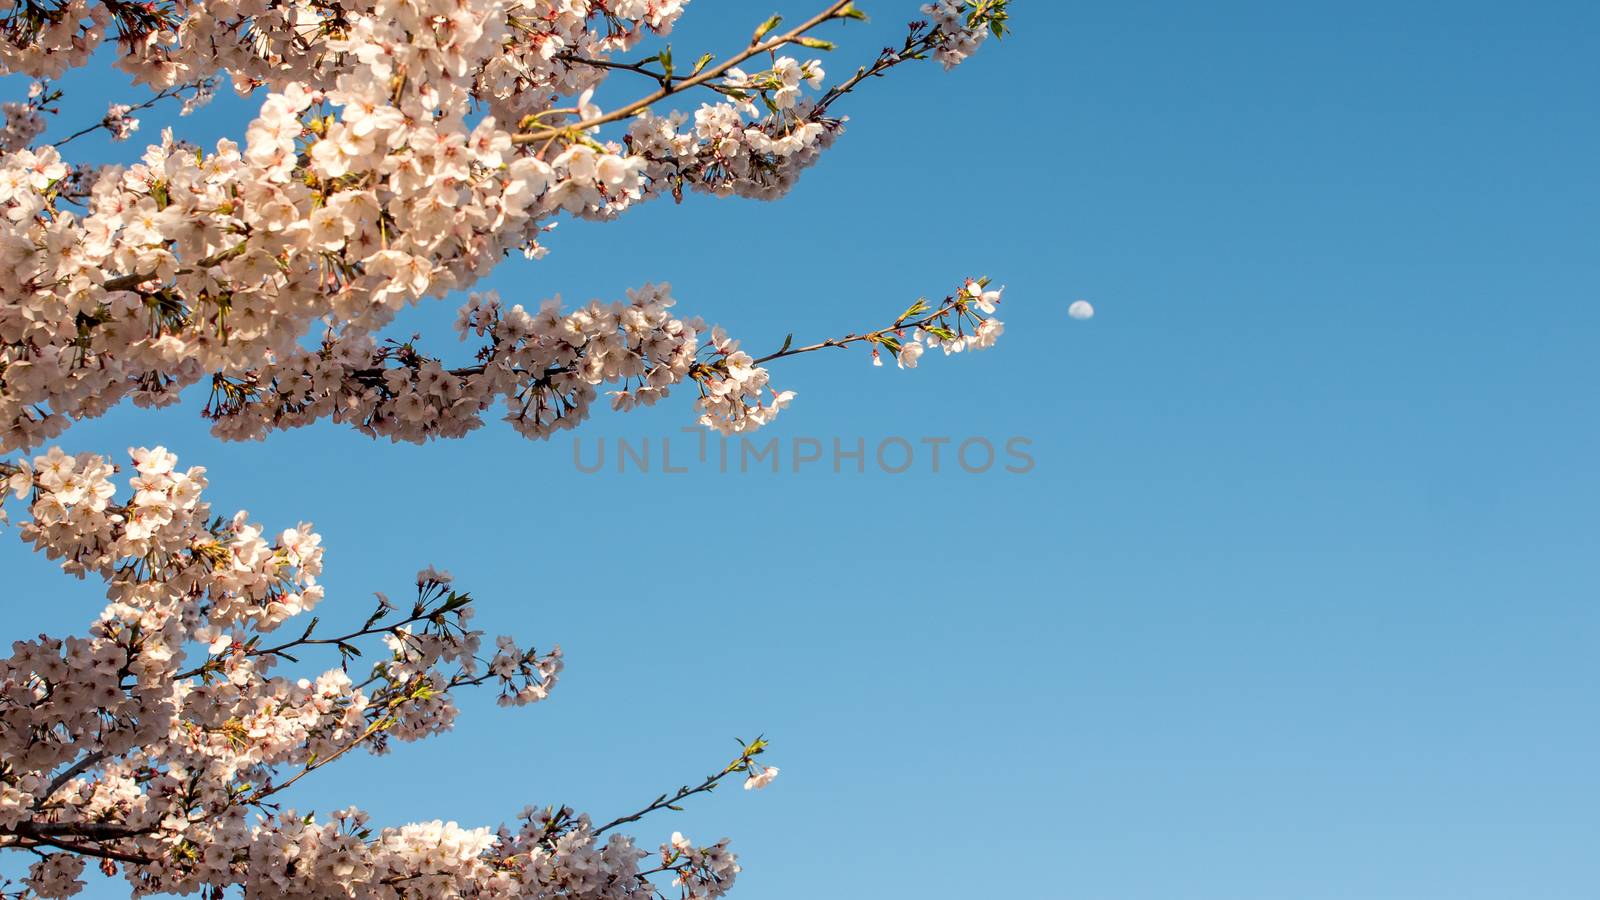 Cherry blossom with moon in background by ontheroadagain